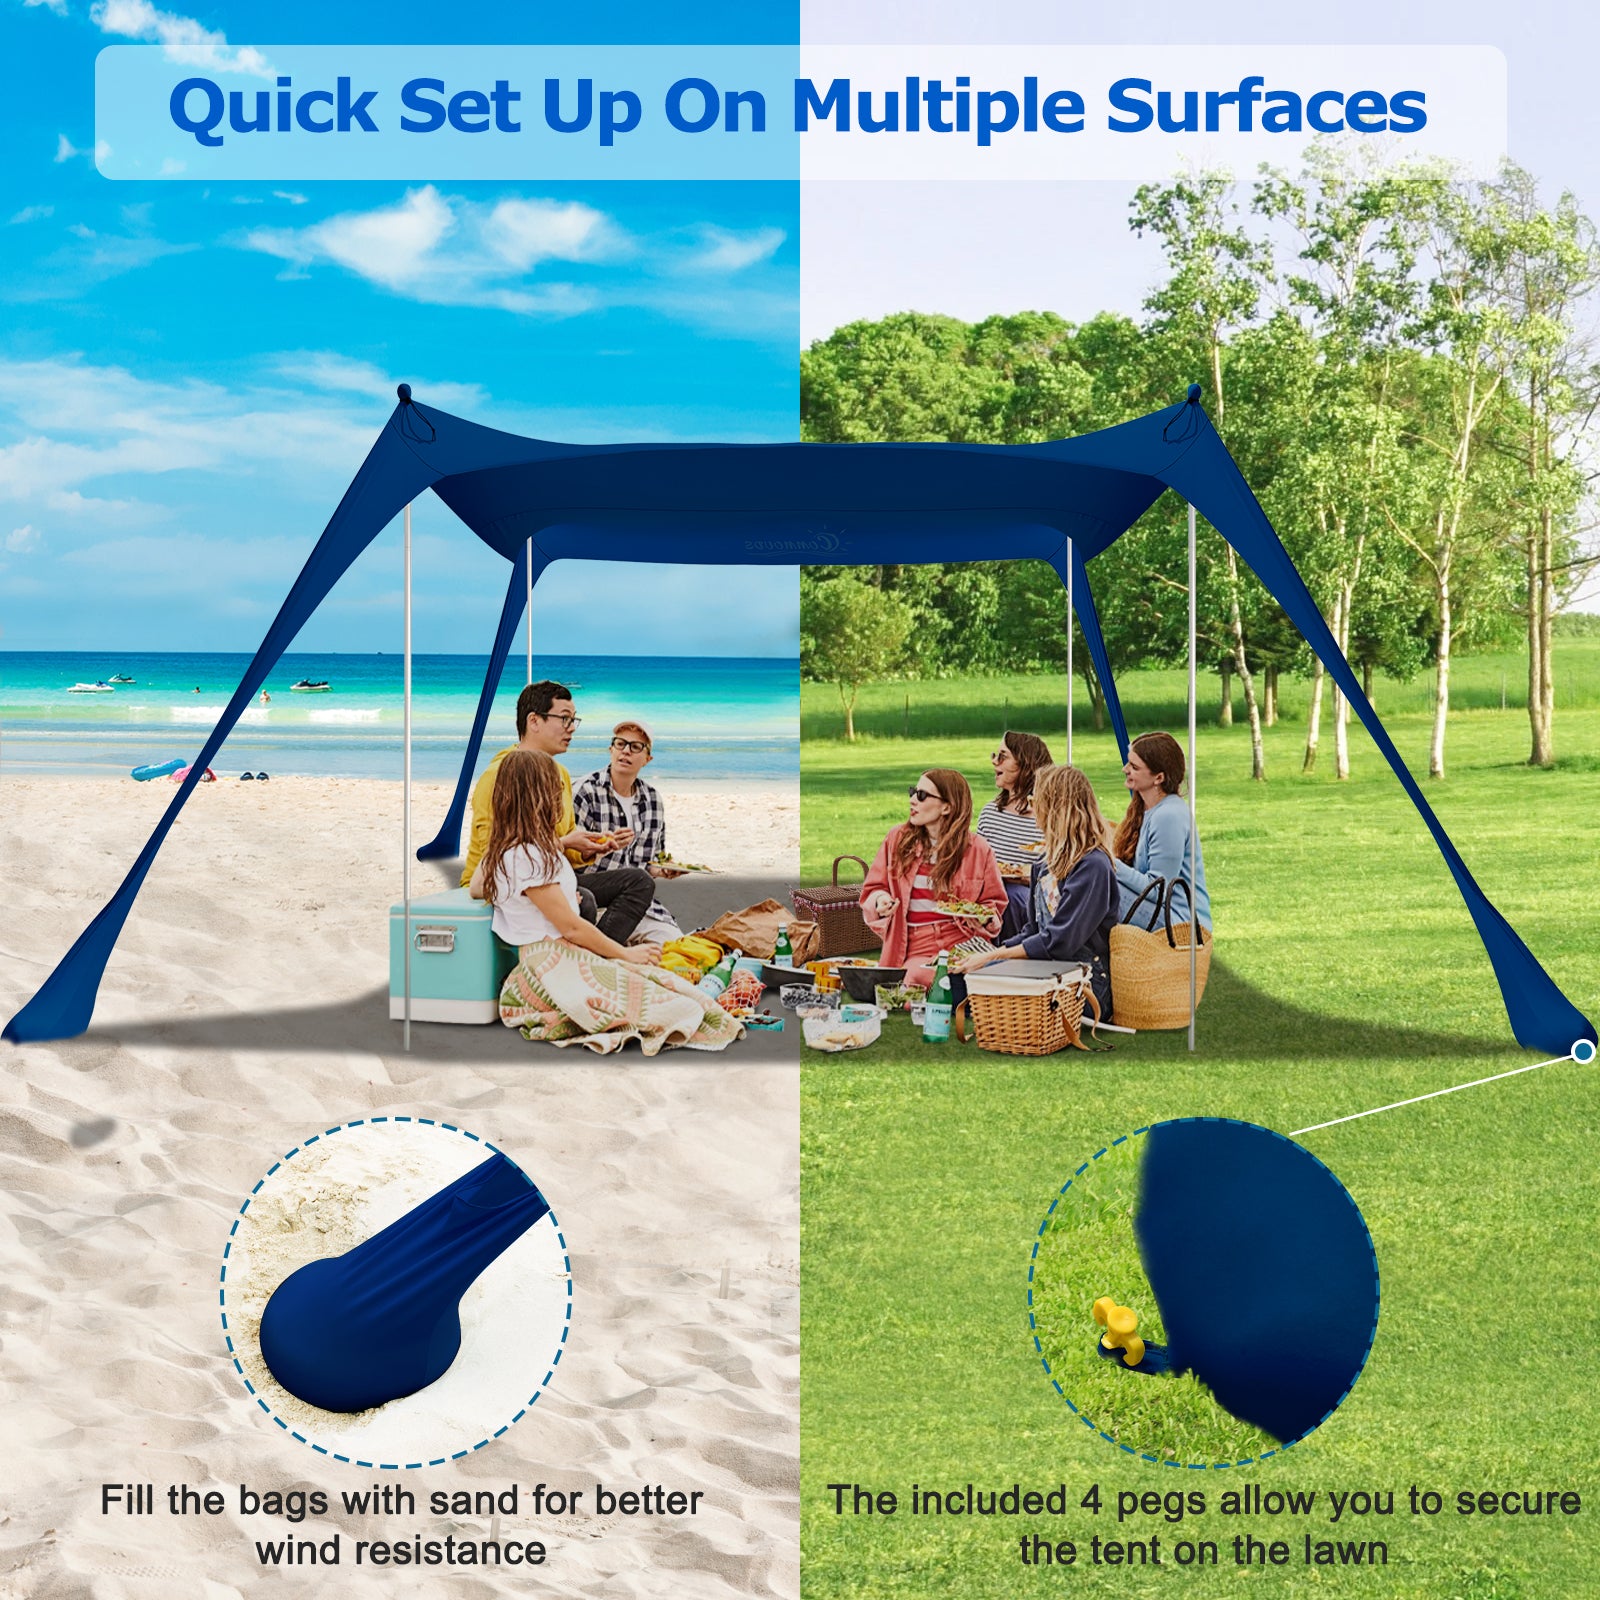  Upgraded - Patented Design Beach Tent 10.5' x 11.5' Fits 4-6  Adults, Sun Shelter Rainbow Suncover, Outdoor Shade for Camping, Backyard,  Picnics - Sand, Grass All Suitable : Sports & Outdoors